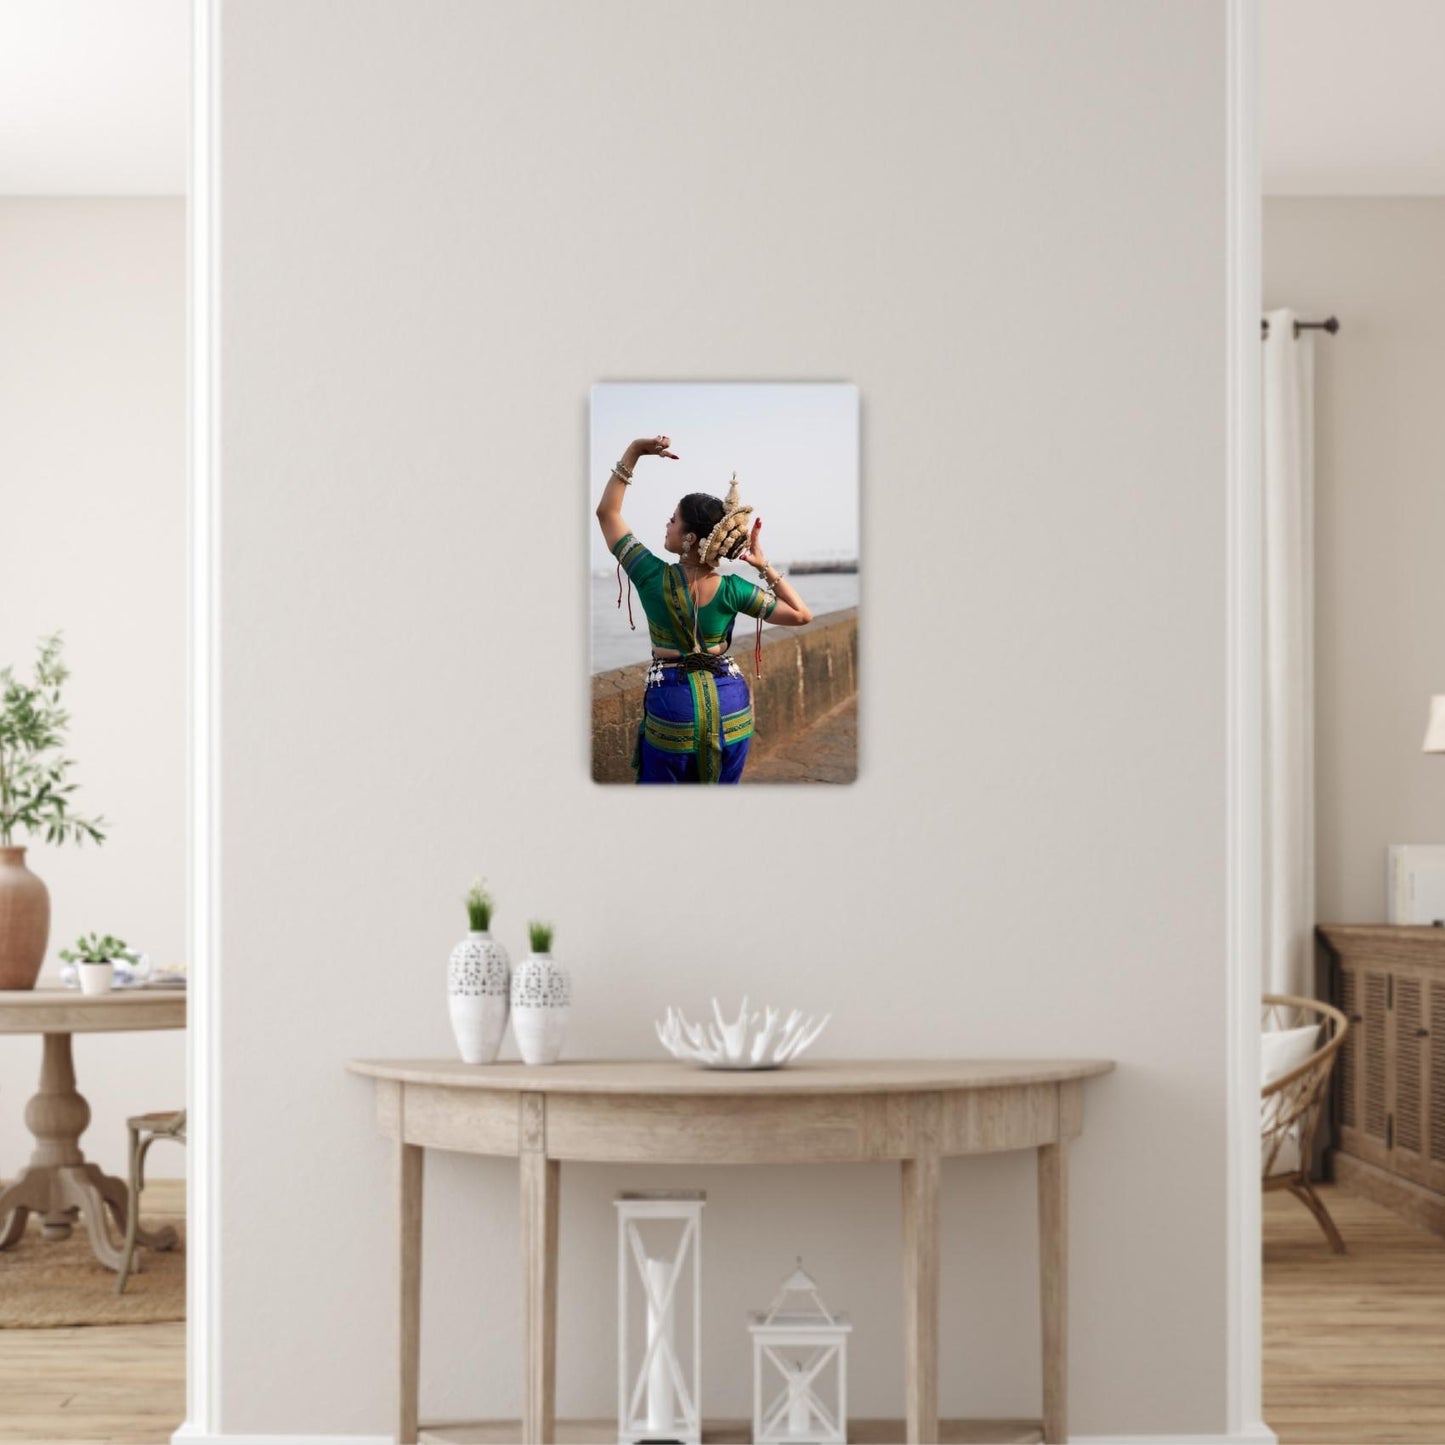 Personalized Acrylic Photo Frame Wall Hanger - A4 size